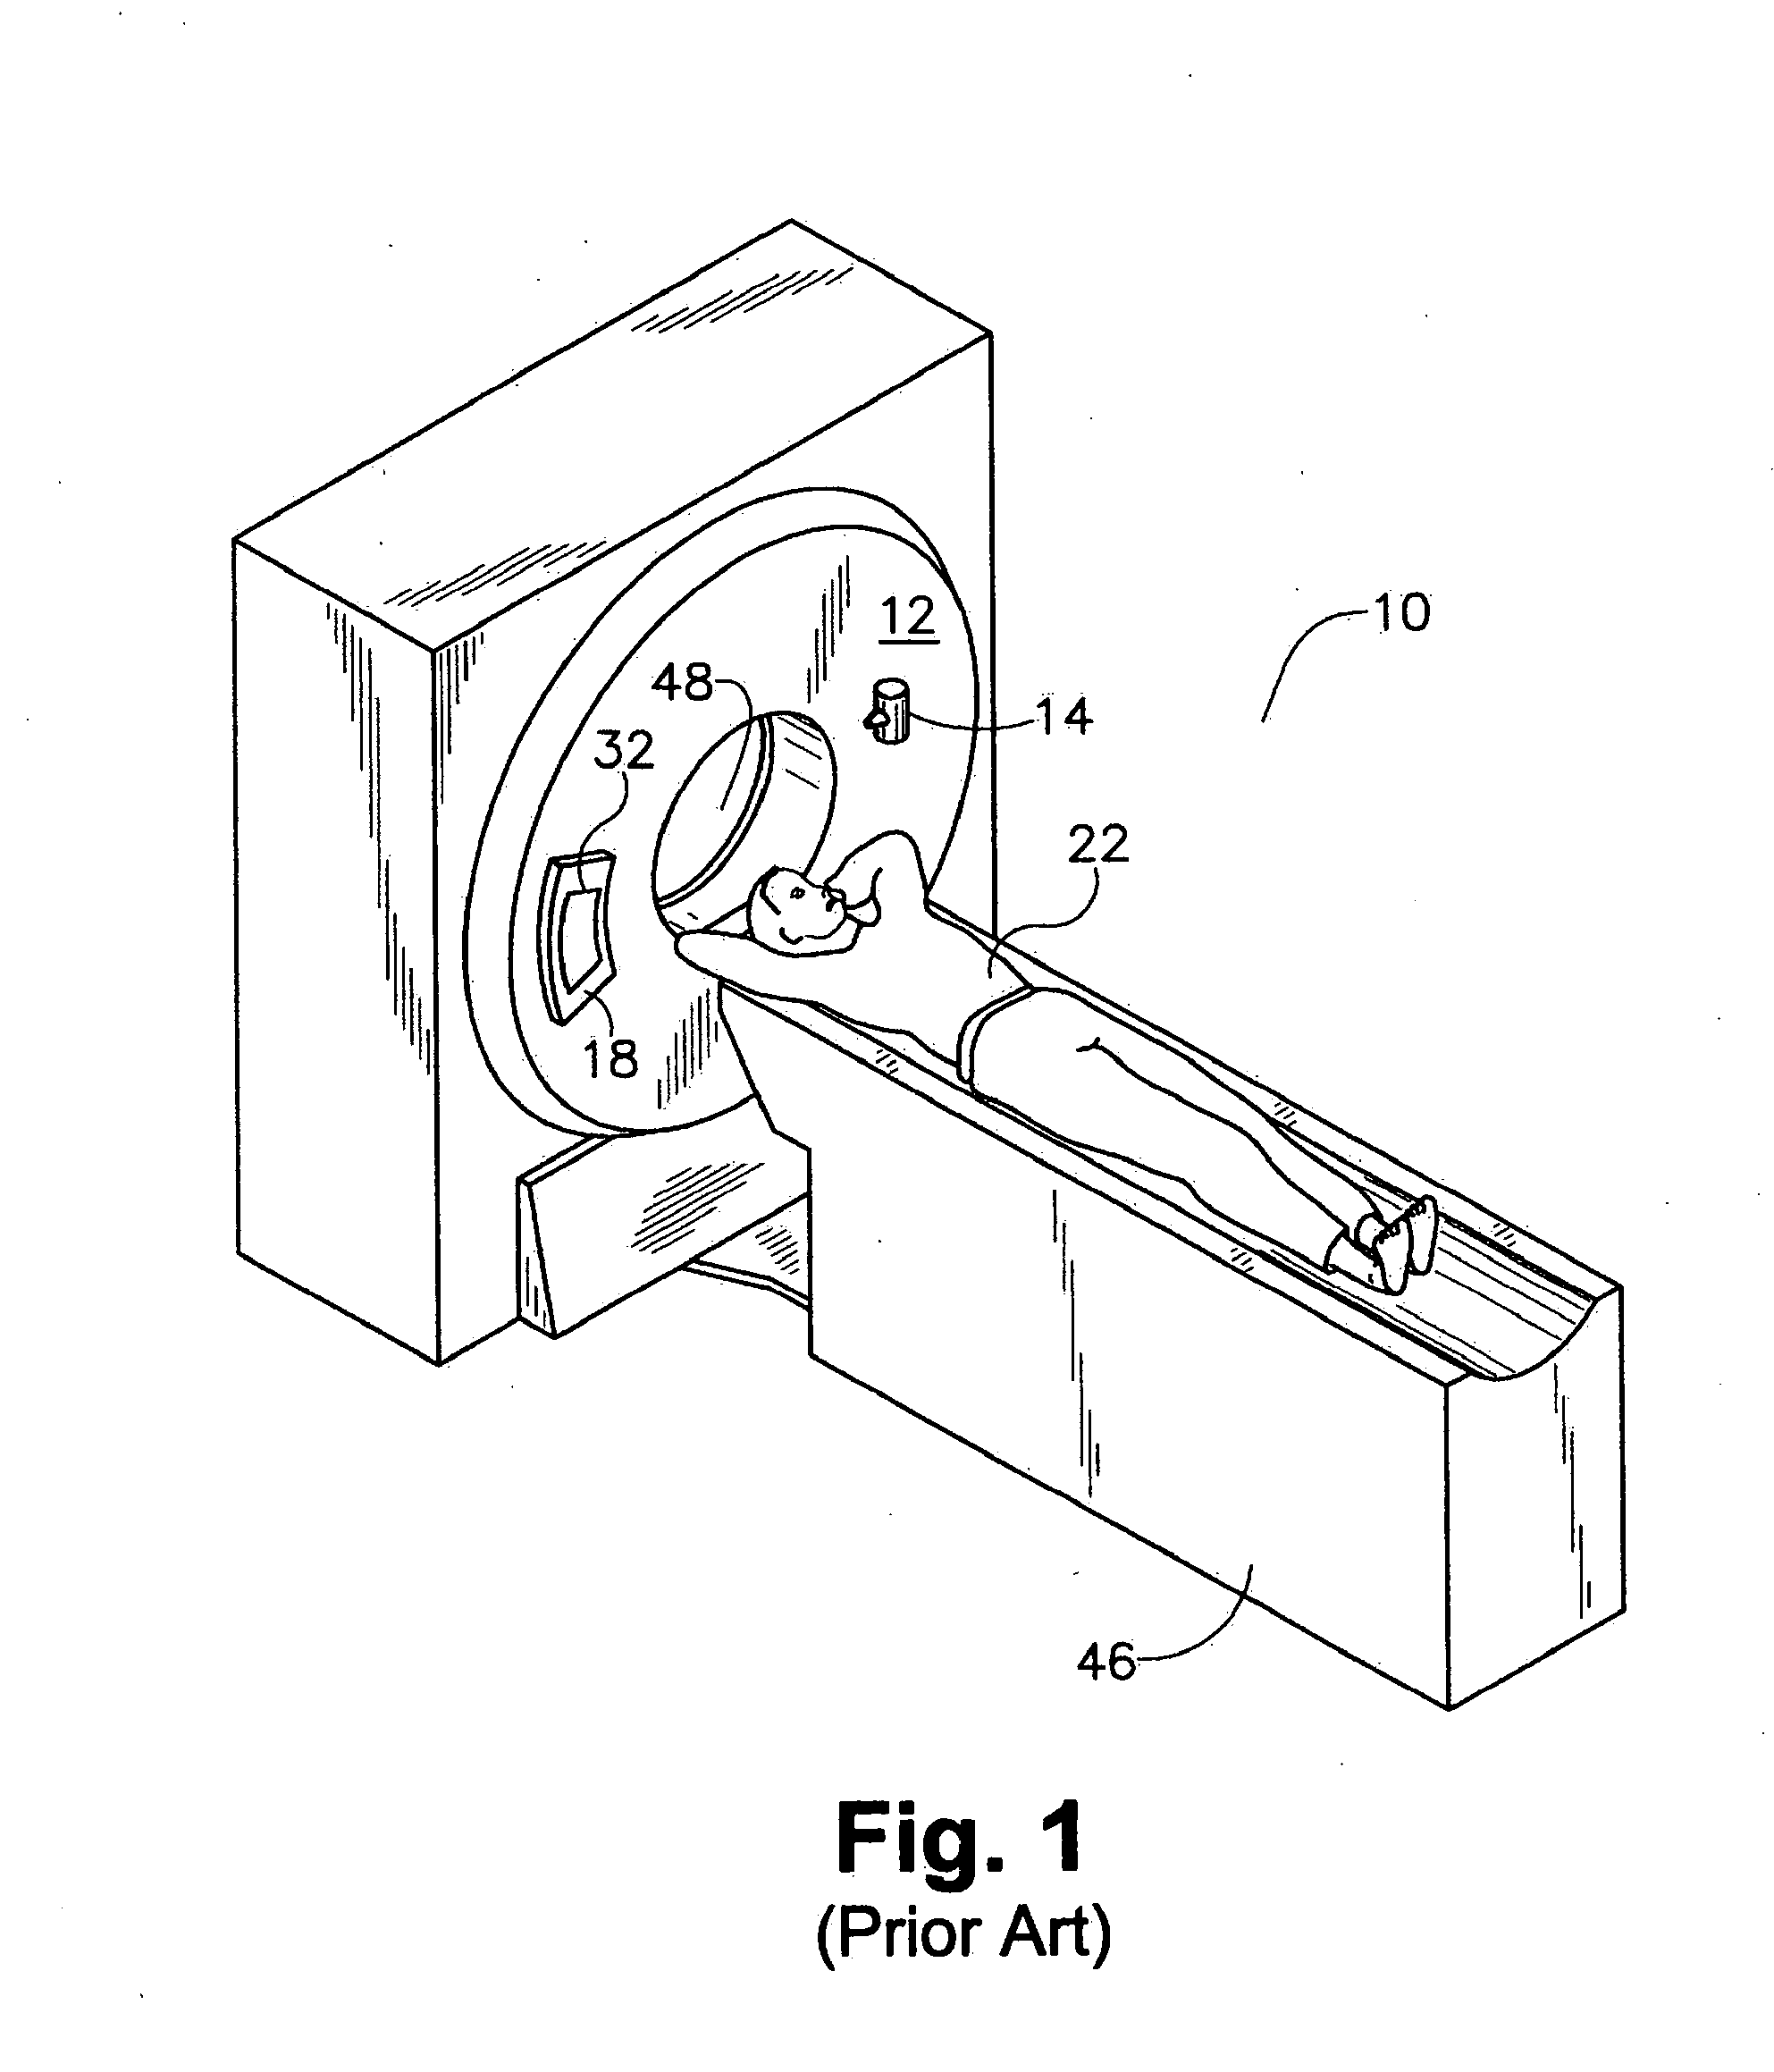 Wide-coverage x-ray source with dual-sided target